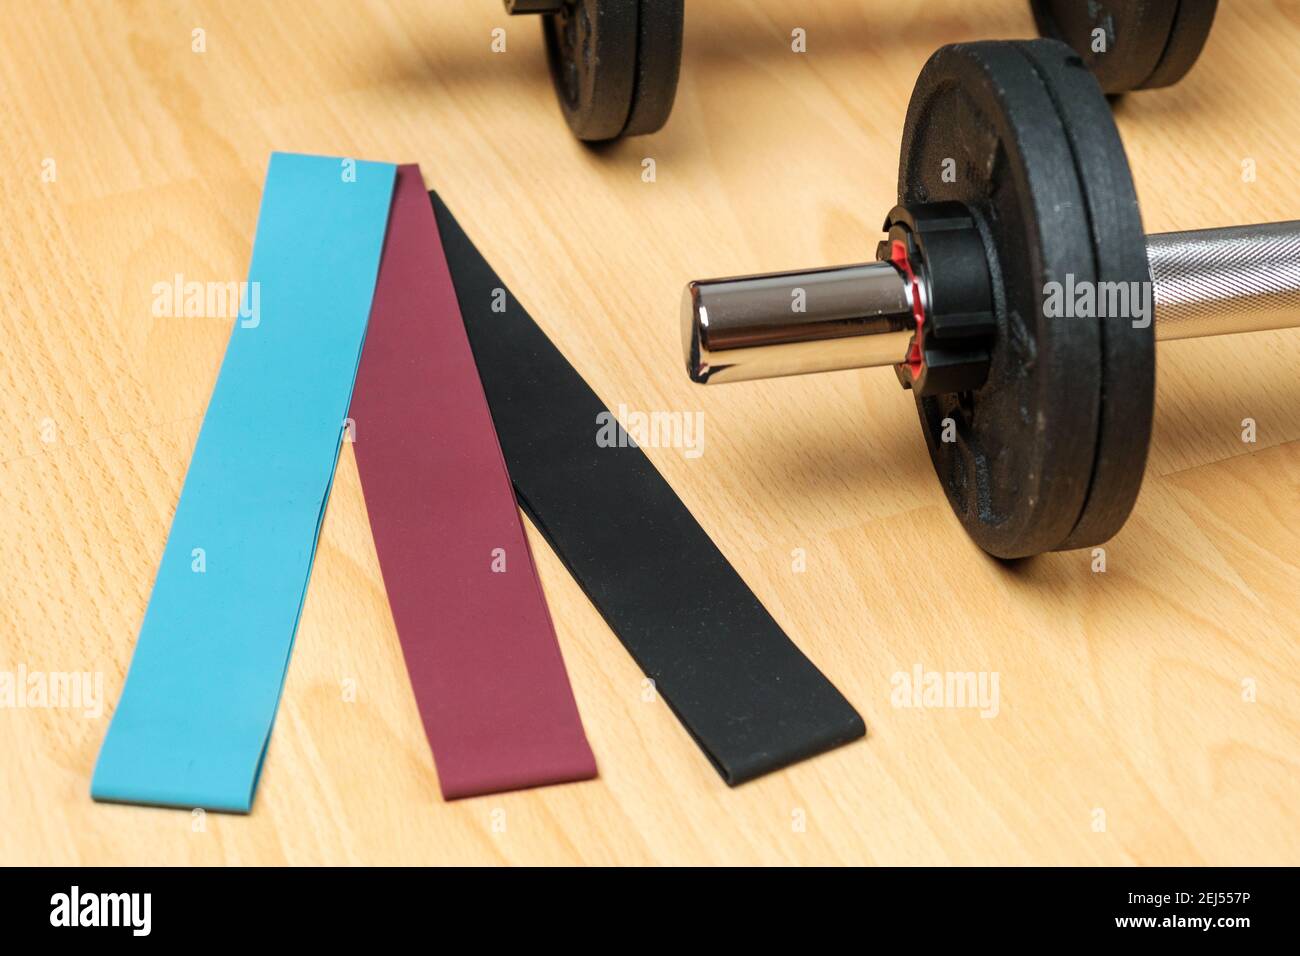 Dumbbells and elastic bands on the floor at home. Keeping fit during lockdown. Fitness equipment for strength training  Stock Photo